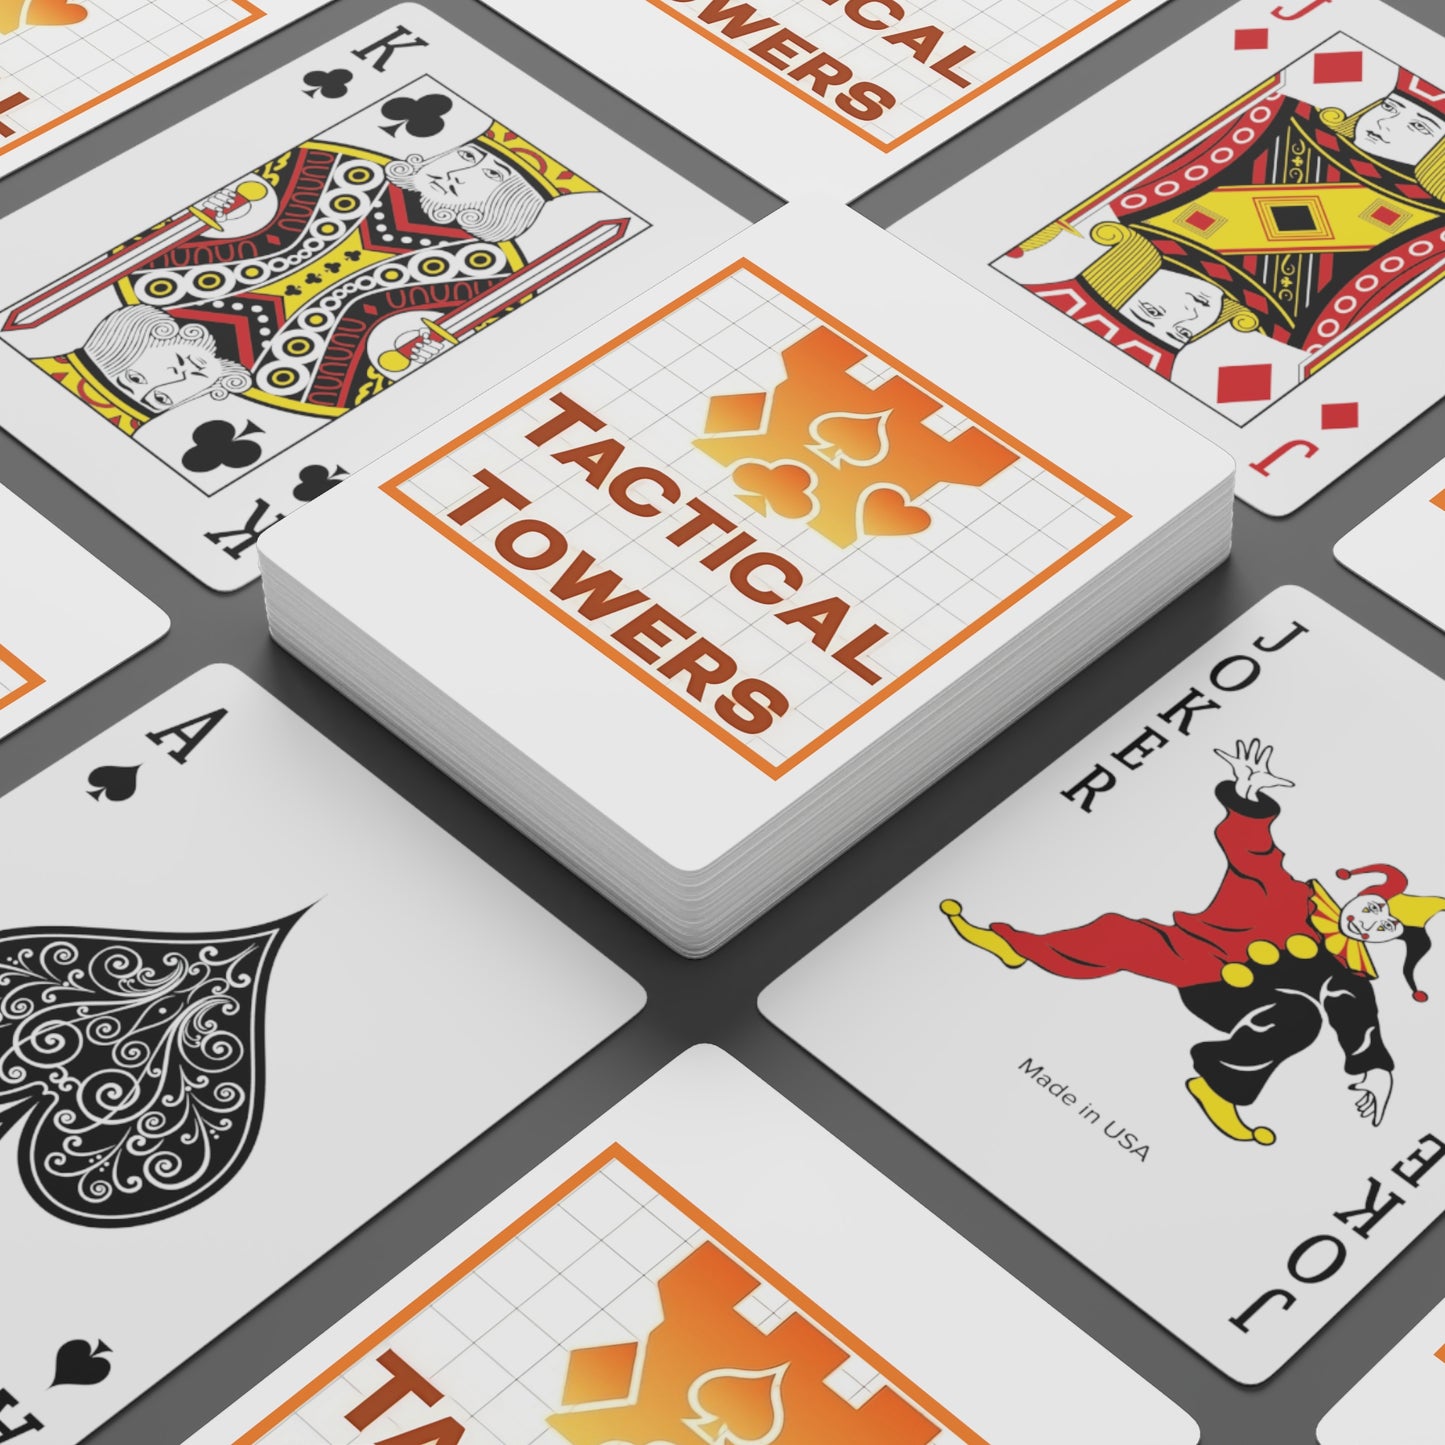 Tactical Towers Card Game - Official Rules (Printable PDF Download)